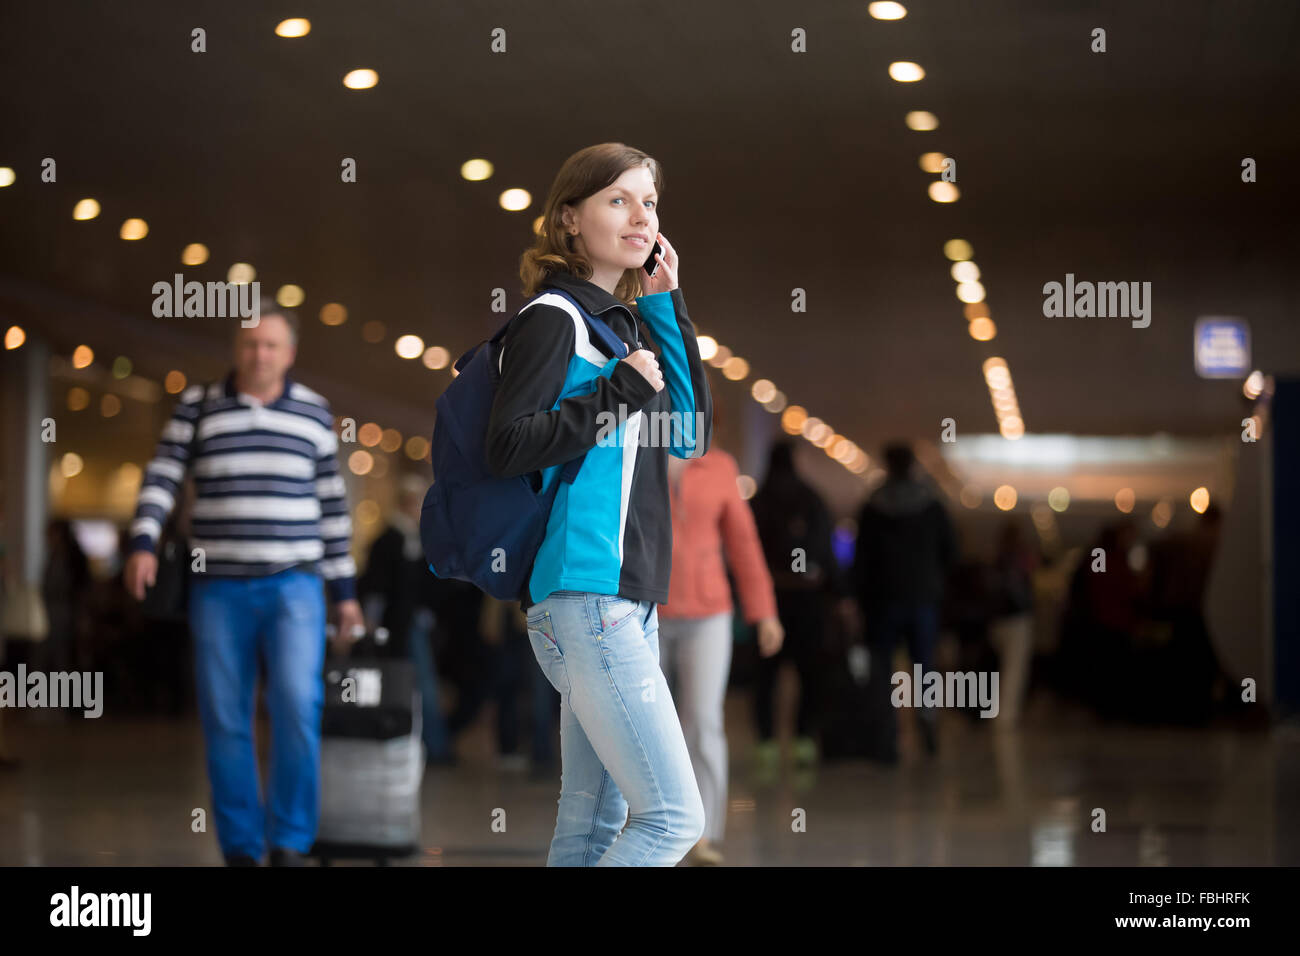 Portrait of smiling young woman in 20s with backpack walking in airport terminal, using cell phone, making call, wearing jersey Stock Photo